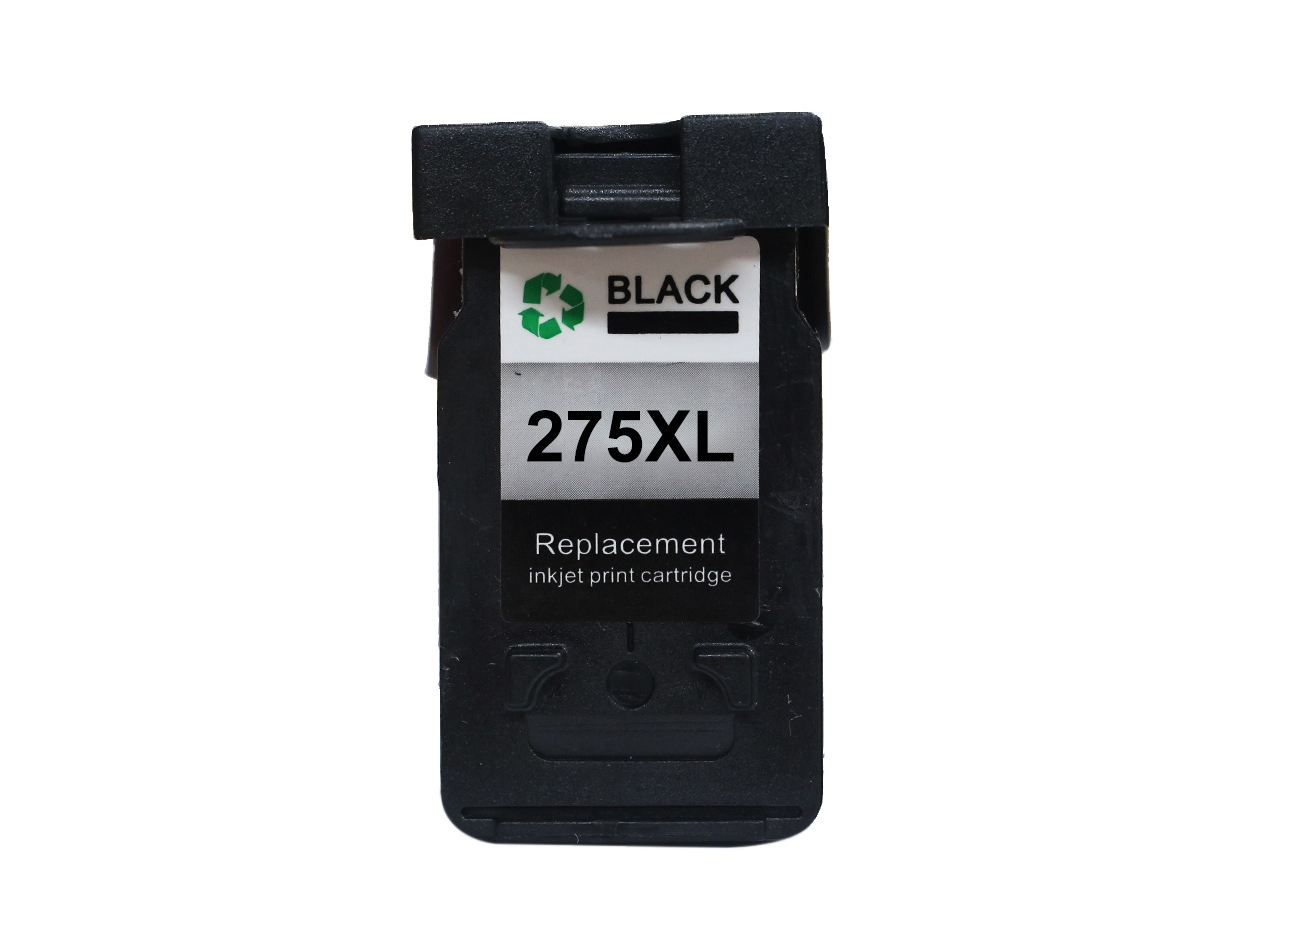 Canon 275XL and 276XL black PG-275XL ink cartridge